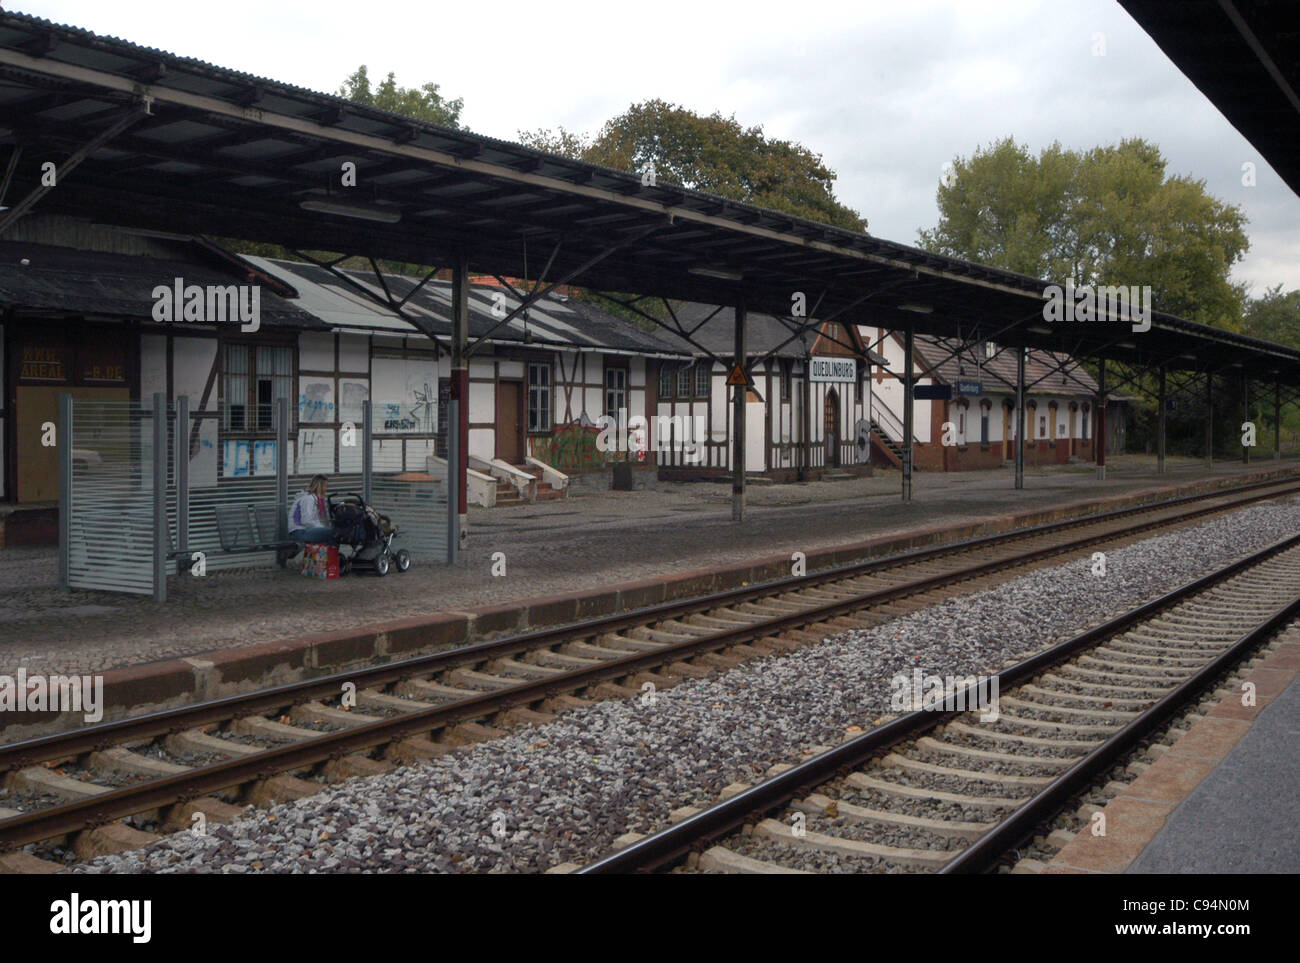 Quedlinburg Railway Station, Germany. Was in the former East Germany until reunification. Stock Photo